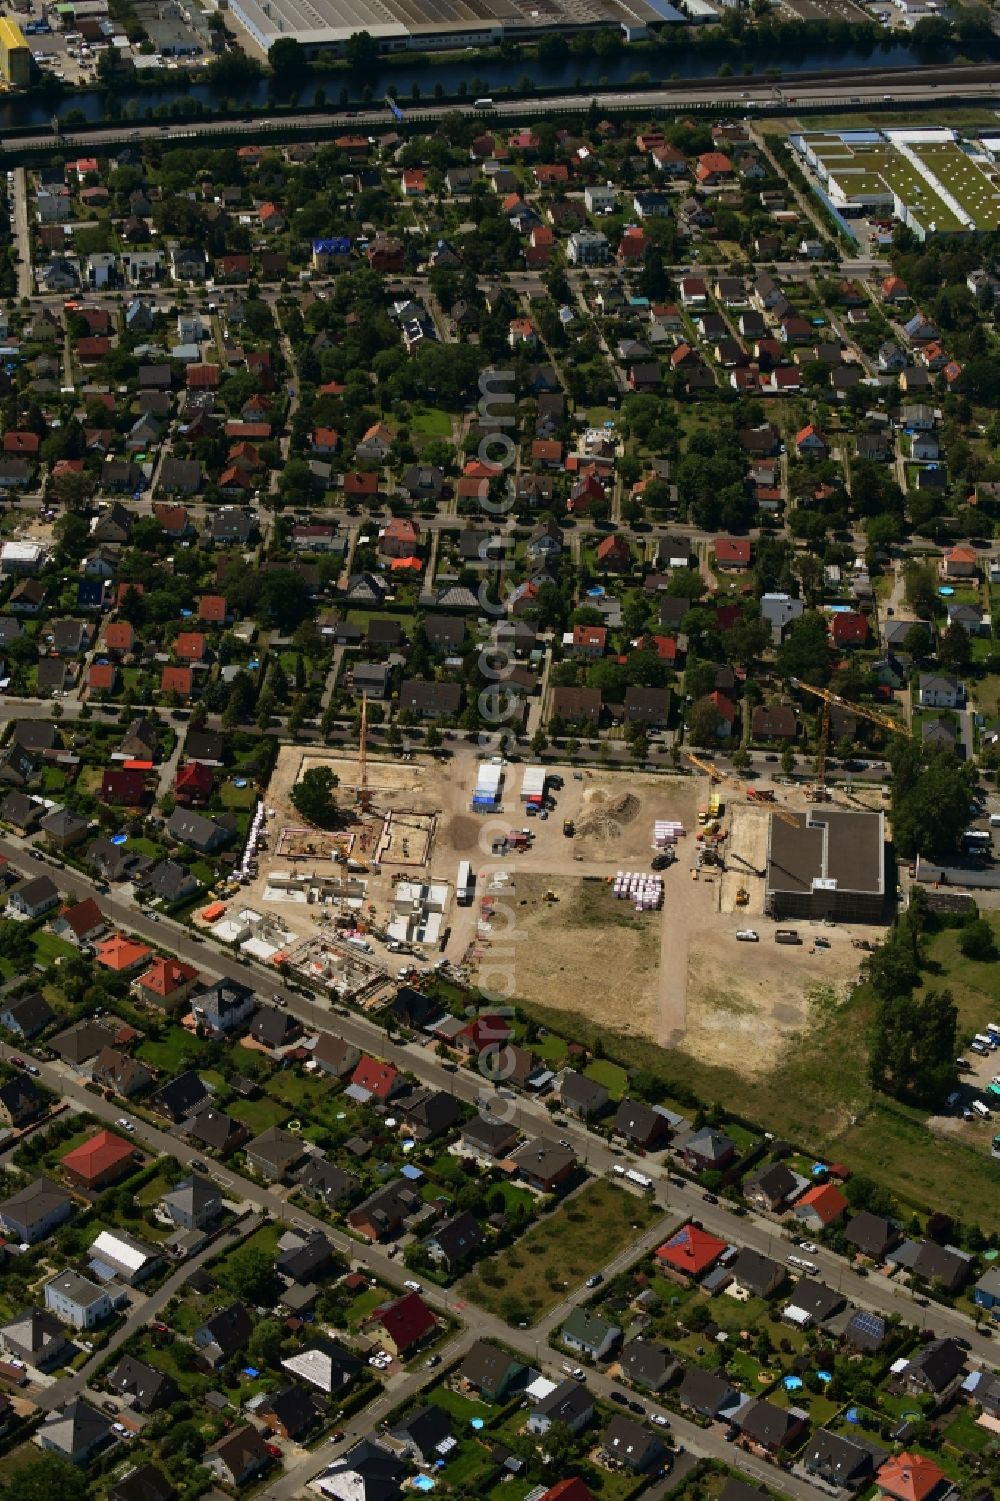 Aerial image Berlin - Construction site to build a new multi-family residential complex of Johannisgaerten between of Strasse am Flugplatz and Melli-Beese-Strasse in the district Johannisthal in Berlin, Germany